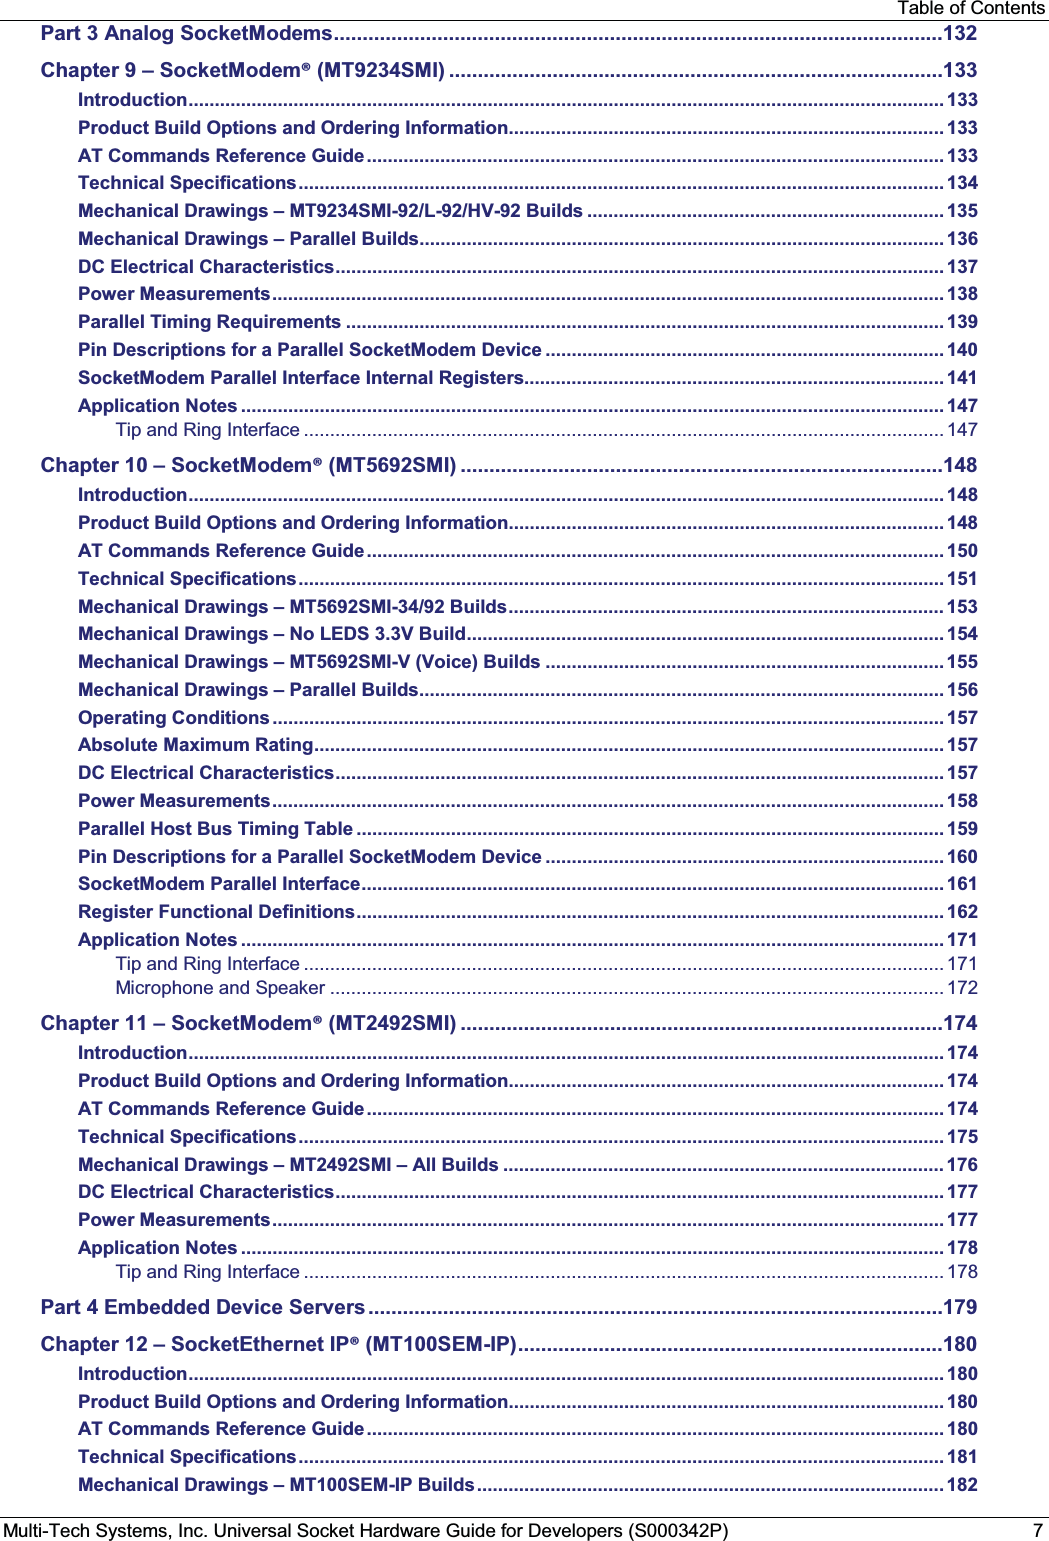 Table of ContentsMulti-Tech Systems, Inc. Universal Socket Hardware Guide for Developers (S000342P) 7Part 3 Analog SocketModems..........................................................................................................132Chapter 9 – SocketModem®(MT9234SMI) ......................................................................................133Introduction................................................................................................................................................ 133Product Build Options and Ordering Information................................................................................... 133AT Commands Reference Guide.............................................................................................................. 133Technical Specifications........................................................................................................................... 134Mechanical Drawings – MT9234SMI-92/L-92/HV-92 Builds .................................................................... 135Mechanical Drawings – Parallel Builds.................................................................................................... 136DC Electrical Characteristics.................................................................................................................... 137Power Measurements................................................................................................................................ 138Parallel Timing Requirements .................................................................................................................. 139Pin Descriptions for a Parallel SocketModem Device ............................................................................ 140SocketModem Parallel Interface Internal Registers................................................................................ 141Application Notes ...................................................................................................................................... 147Tip and Ring Interface .......................................................................................................................... 147Chapter 10 – SocketModem®(MT5692SMI) ....................................................................................148Introduction................................................................................................................................................ 148Product Build Options and Ordering Information................................................................................... 148AT Commands Reference Guide.............................................................................................................. 150Technical Specifications........................................................................................................................... 151Mechanical Drawings – MT5692SMI-34/92 Builds................................................................................... 153Mechanical Drawings – No LEDS 3.3V Build........................................................................................... 154Mechanical Drawings – MT5692SMI-V (Voice) Builds ............................................................................ 155Mechanical Drawings – Parallel Builds.................................................................................................... 156Operating Conditions................................................................................................................................ 157Absolute Maximum Rating........................................................................................................................ 157DC Electrical Characteristics.................................................................................................................... 157Power Measurements................................................................................................................................ 158Parallel Host Bus Timing Table ................................................................................................................ 159Pin Descriptions for a Parallel SocketModem Device ............................................................................ 160SocketModem Parallel Interface............................................................................................................... 161Register Functional Definitions................................................................................................................ 162Application Notes ...................................................................................................................................... 171Tip and Ring Interface .......................................................................................................................... 171Microphone and Speaker ..................................................................................................................... 172Chapter 11 – SocketModem®(MT2492SMI) ....................................................................................174Introduction................................................................................................................................................ 174Product Build Options and Ordering Information................................................................................... 174AT Commands Reference Guide.............................................................................................................. 174Technical Specifications........................................................................................................................... 175Mechanical Drawings – MT2492SMI – All Builds .................................................................................... 176DC Electrical Characteristics.................................................................................................................... 177Power Measurements................................................................................................................................ 177Application Notes ...................................................................................................................................... 178Tip and Ring Interface .......................................................................................................................... 178Part 4 Embedded Device Servers ....................................................................................................179Chapter 12 – SocketEthernet IP®(MT100SEM-IP)..........................................................................180Introduction................................................................................................................................................ 180Product Build Options and Ordering Information................................................................................... 180AT Commands Reference Guide.............................................................................................................. 180Technical Specifications........................................................................................................................... 181Mechanical Drawings – MT100SEM-IP Builds......................................................................................... 182